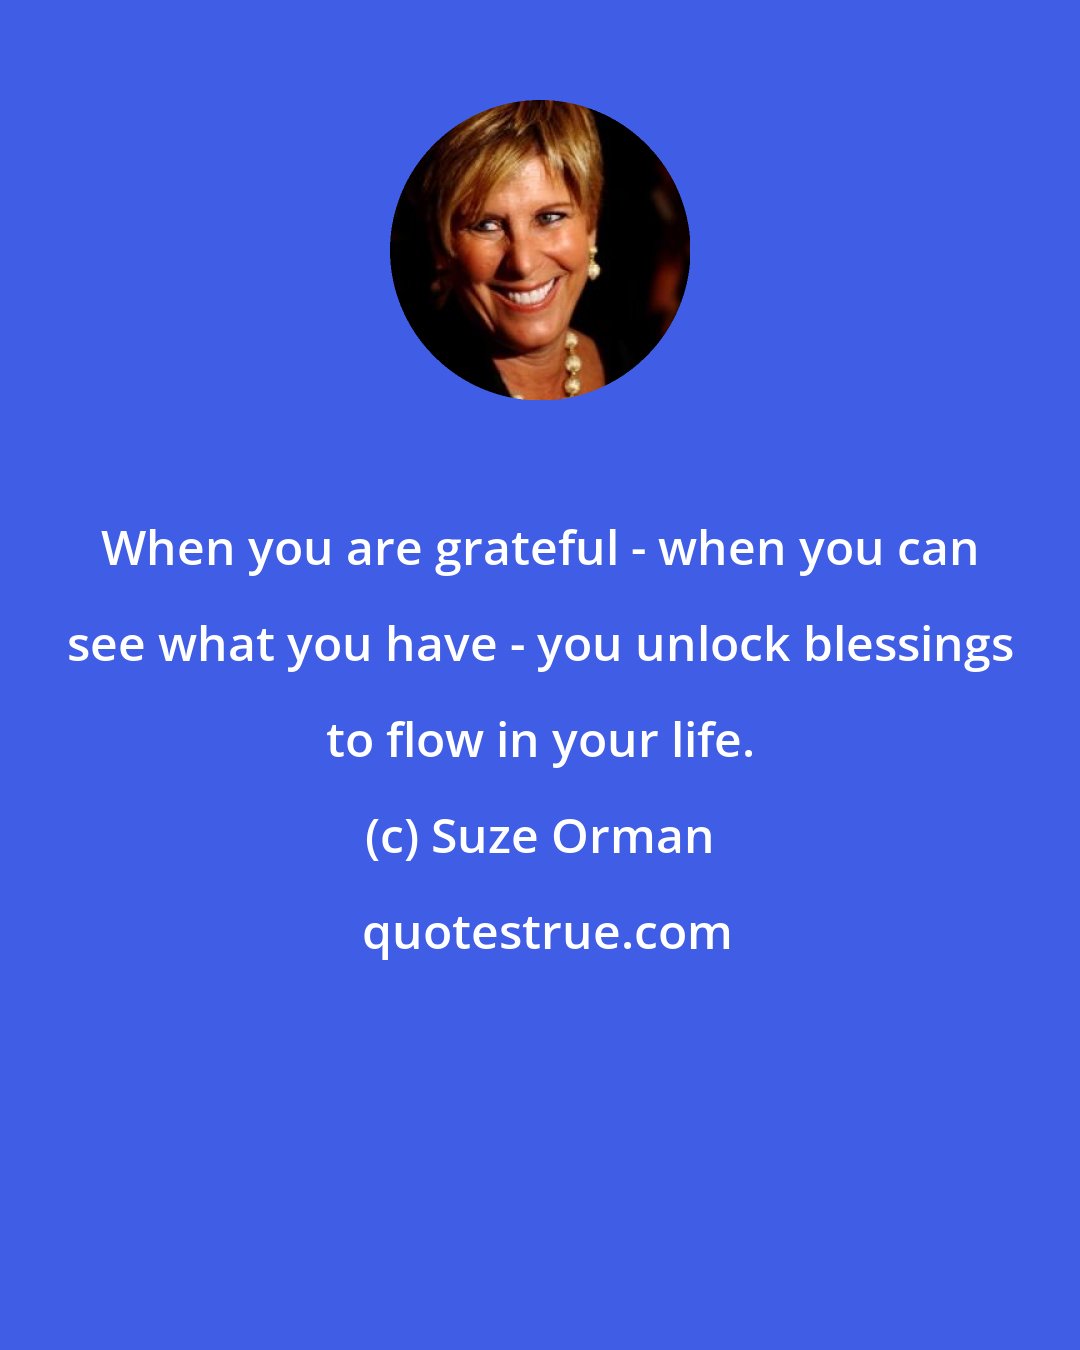 Suze Orman: When you are grateful - when you can see what you have - you unlock blessings to flow in your life.